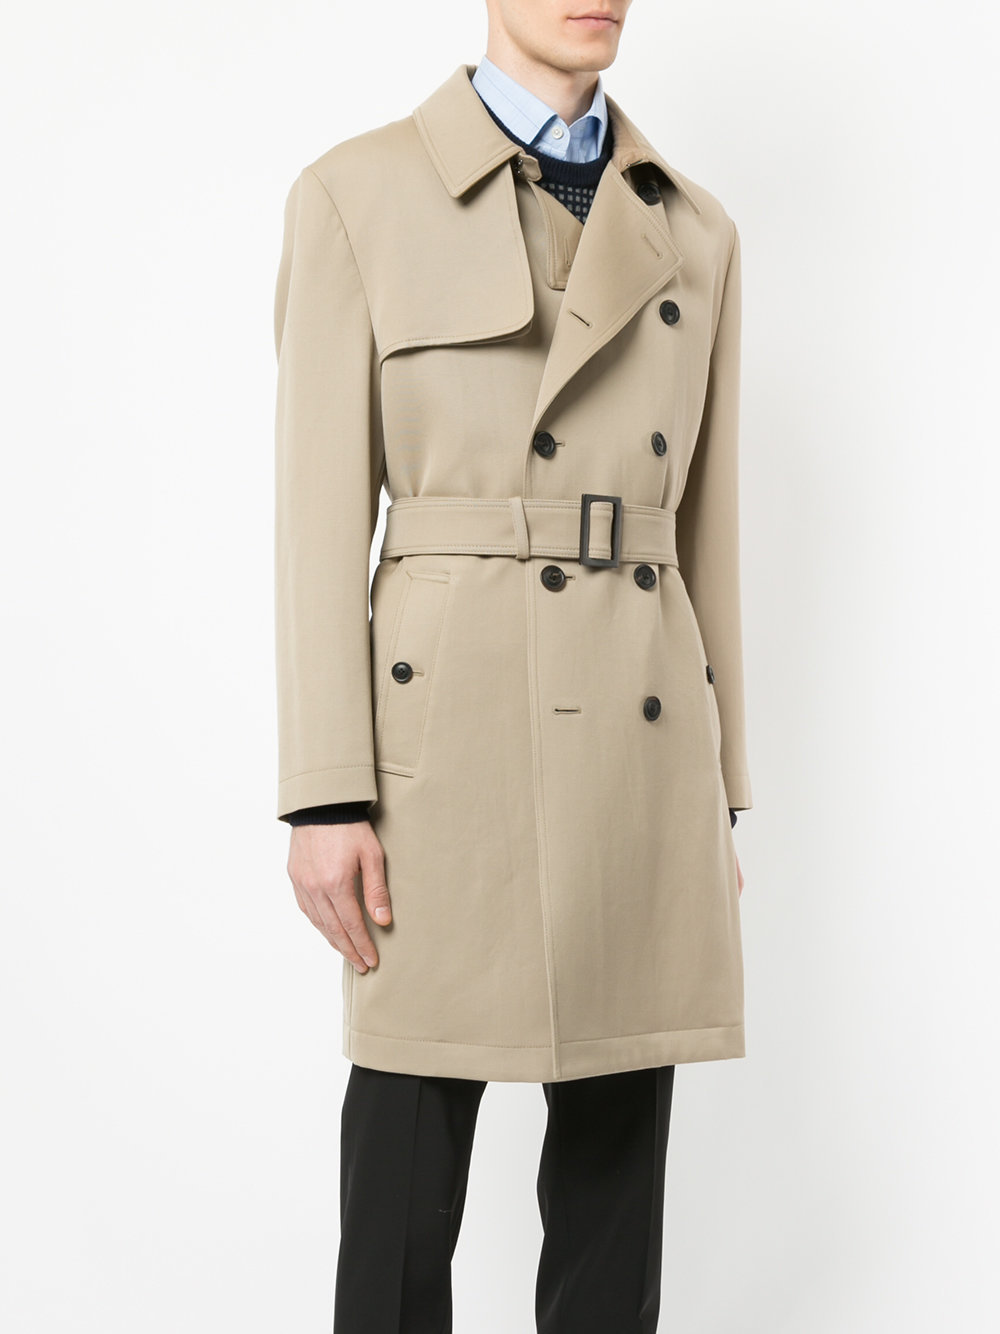 Gieves & Hawkes Classic Trench Coat, $486 | farfetch.com | Lookastic.com